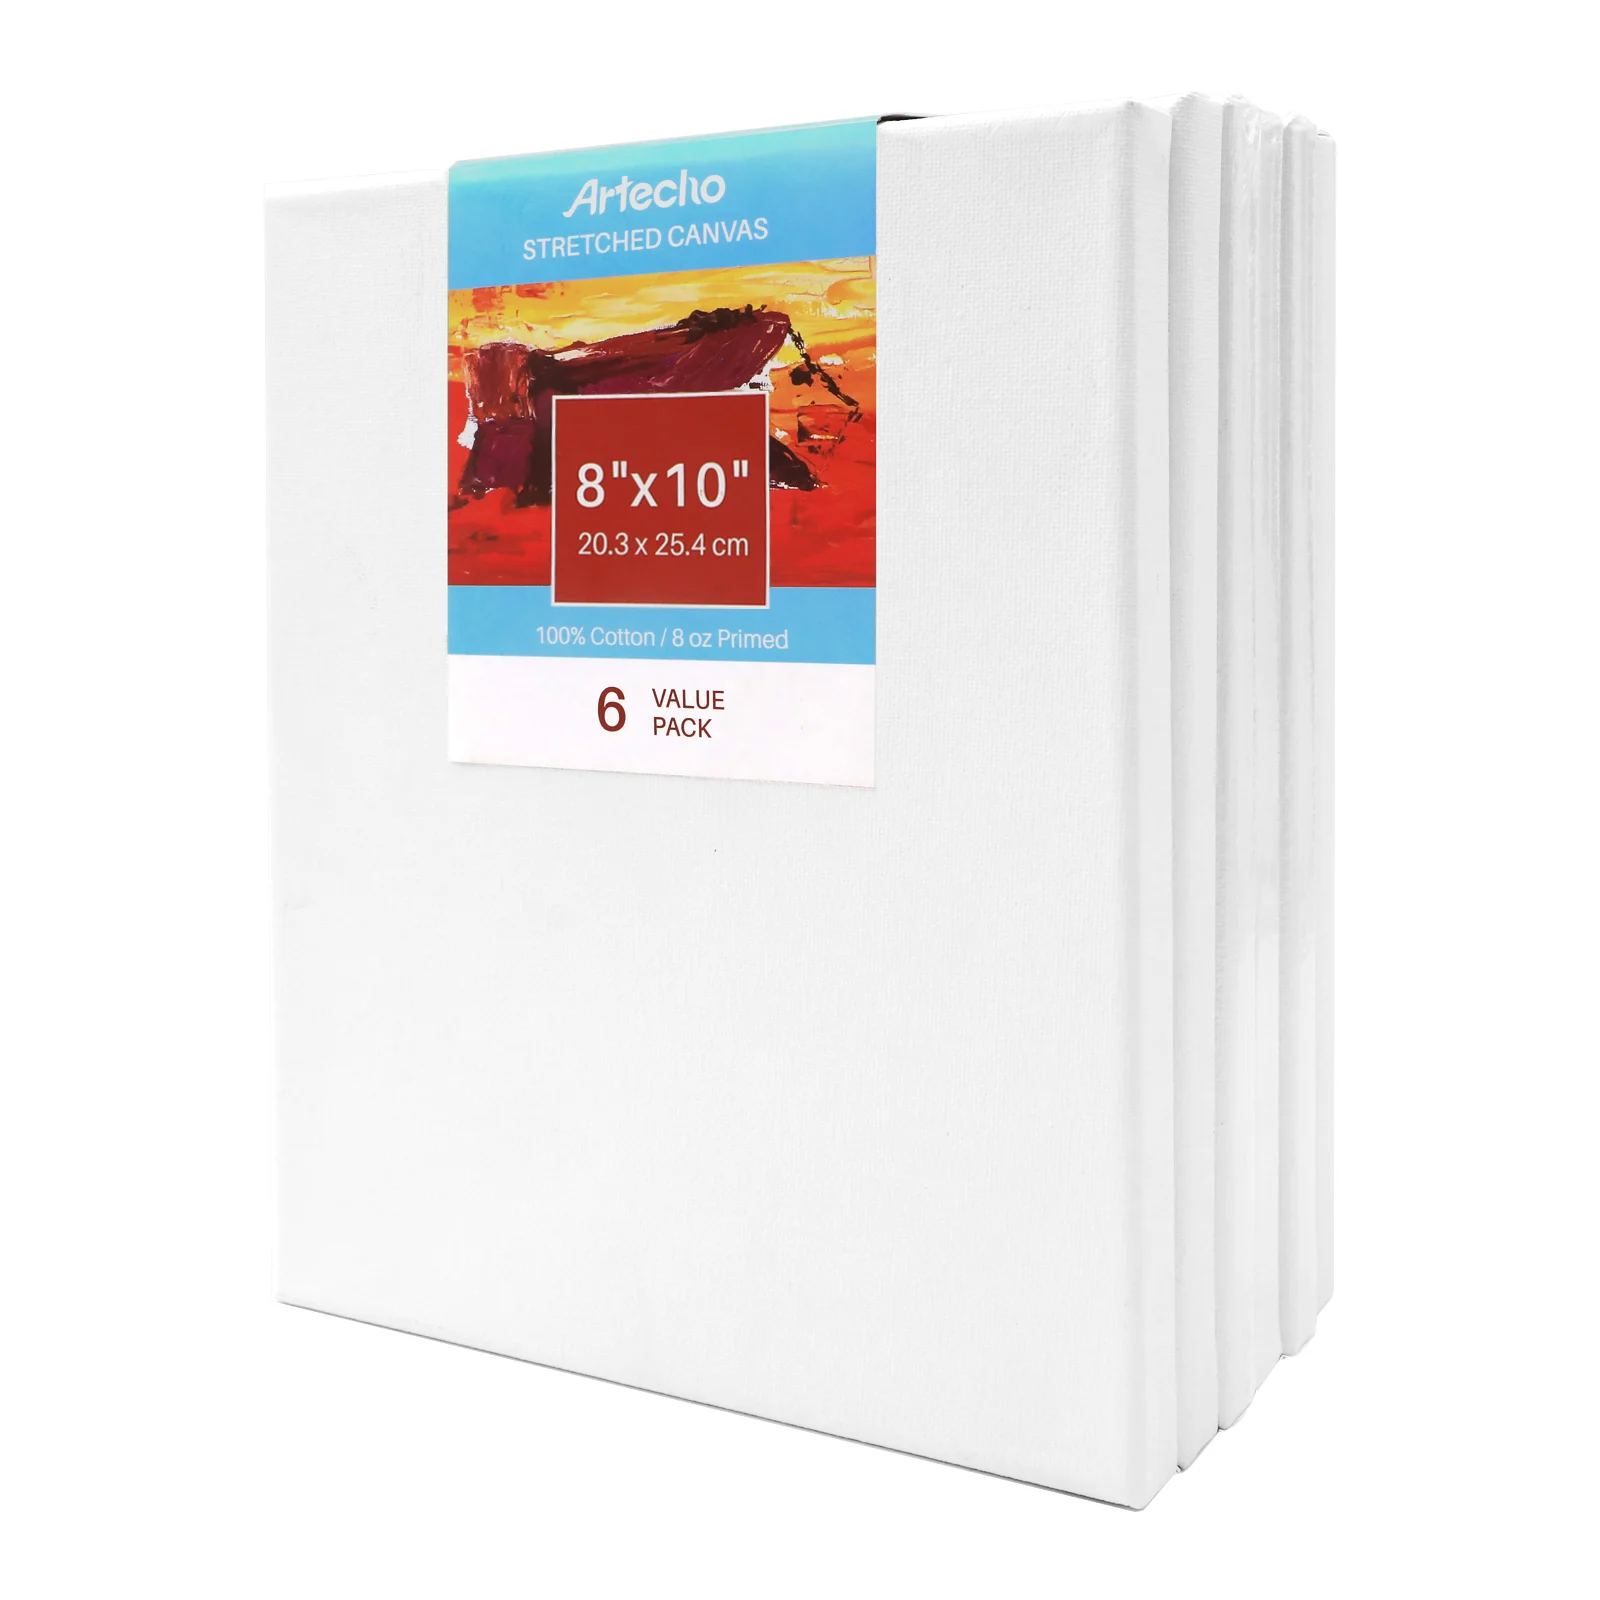 Artecho art canvas stretched canvas pad 8x10'  Blank 6 Pack,painting canvas